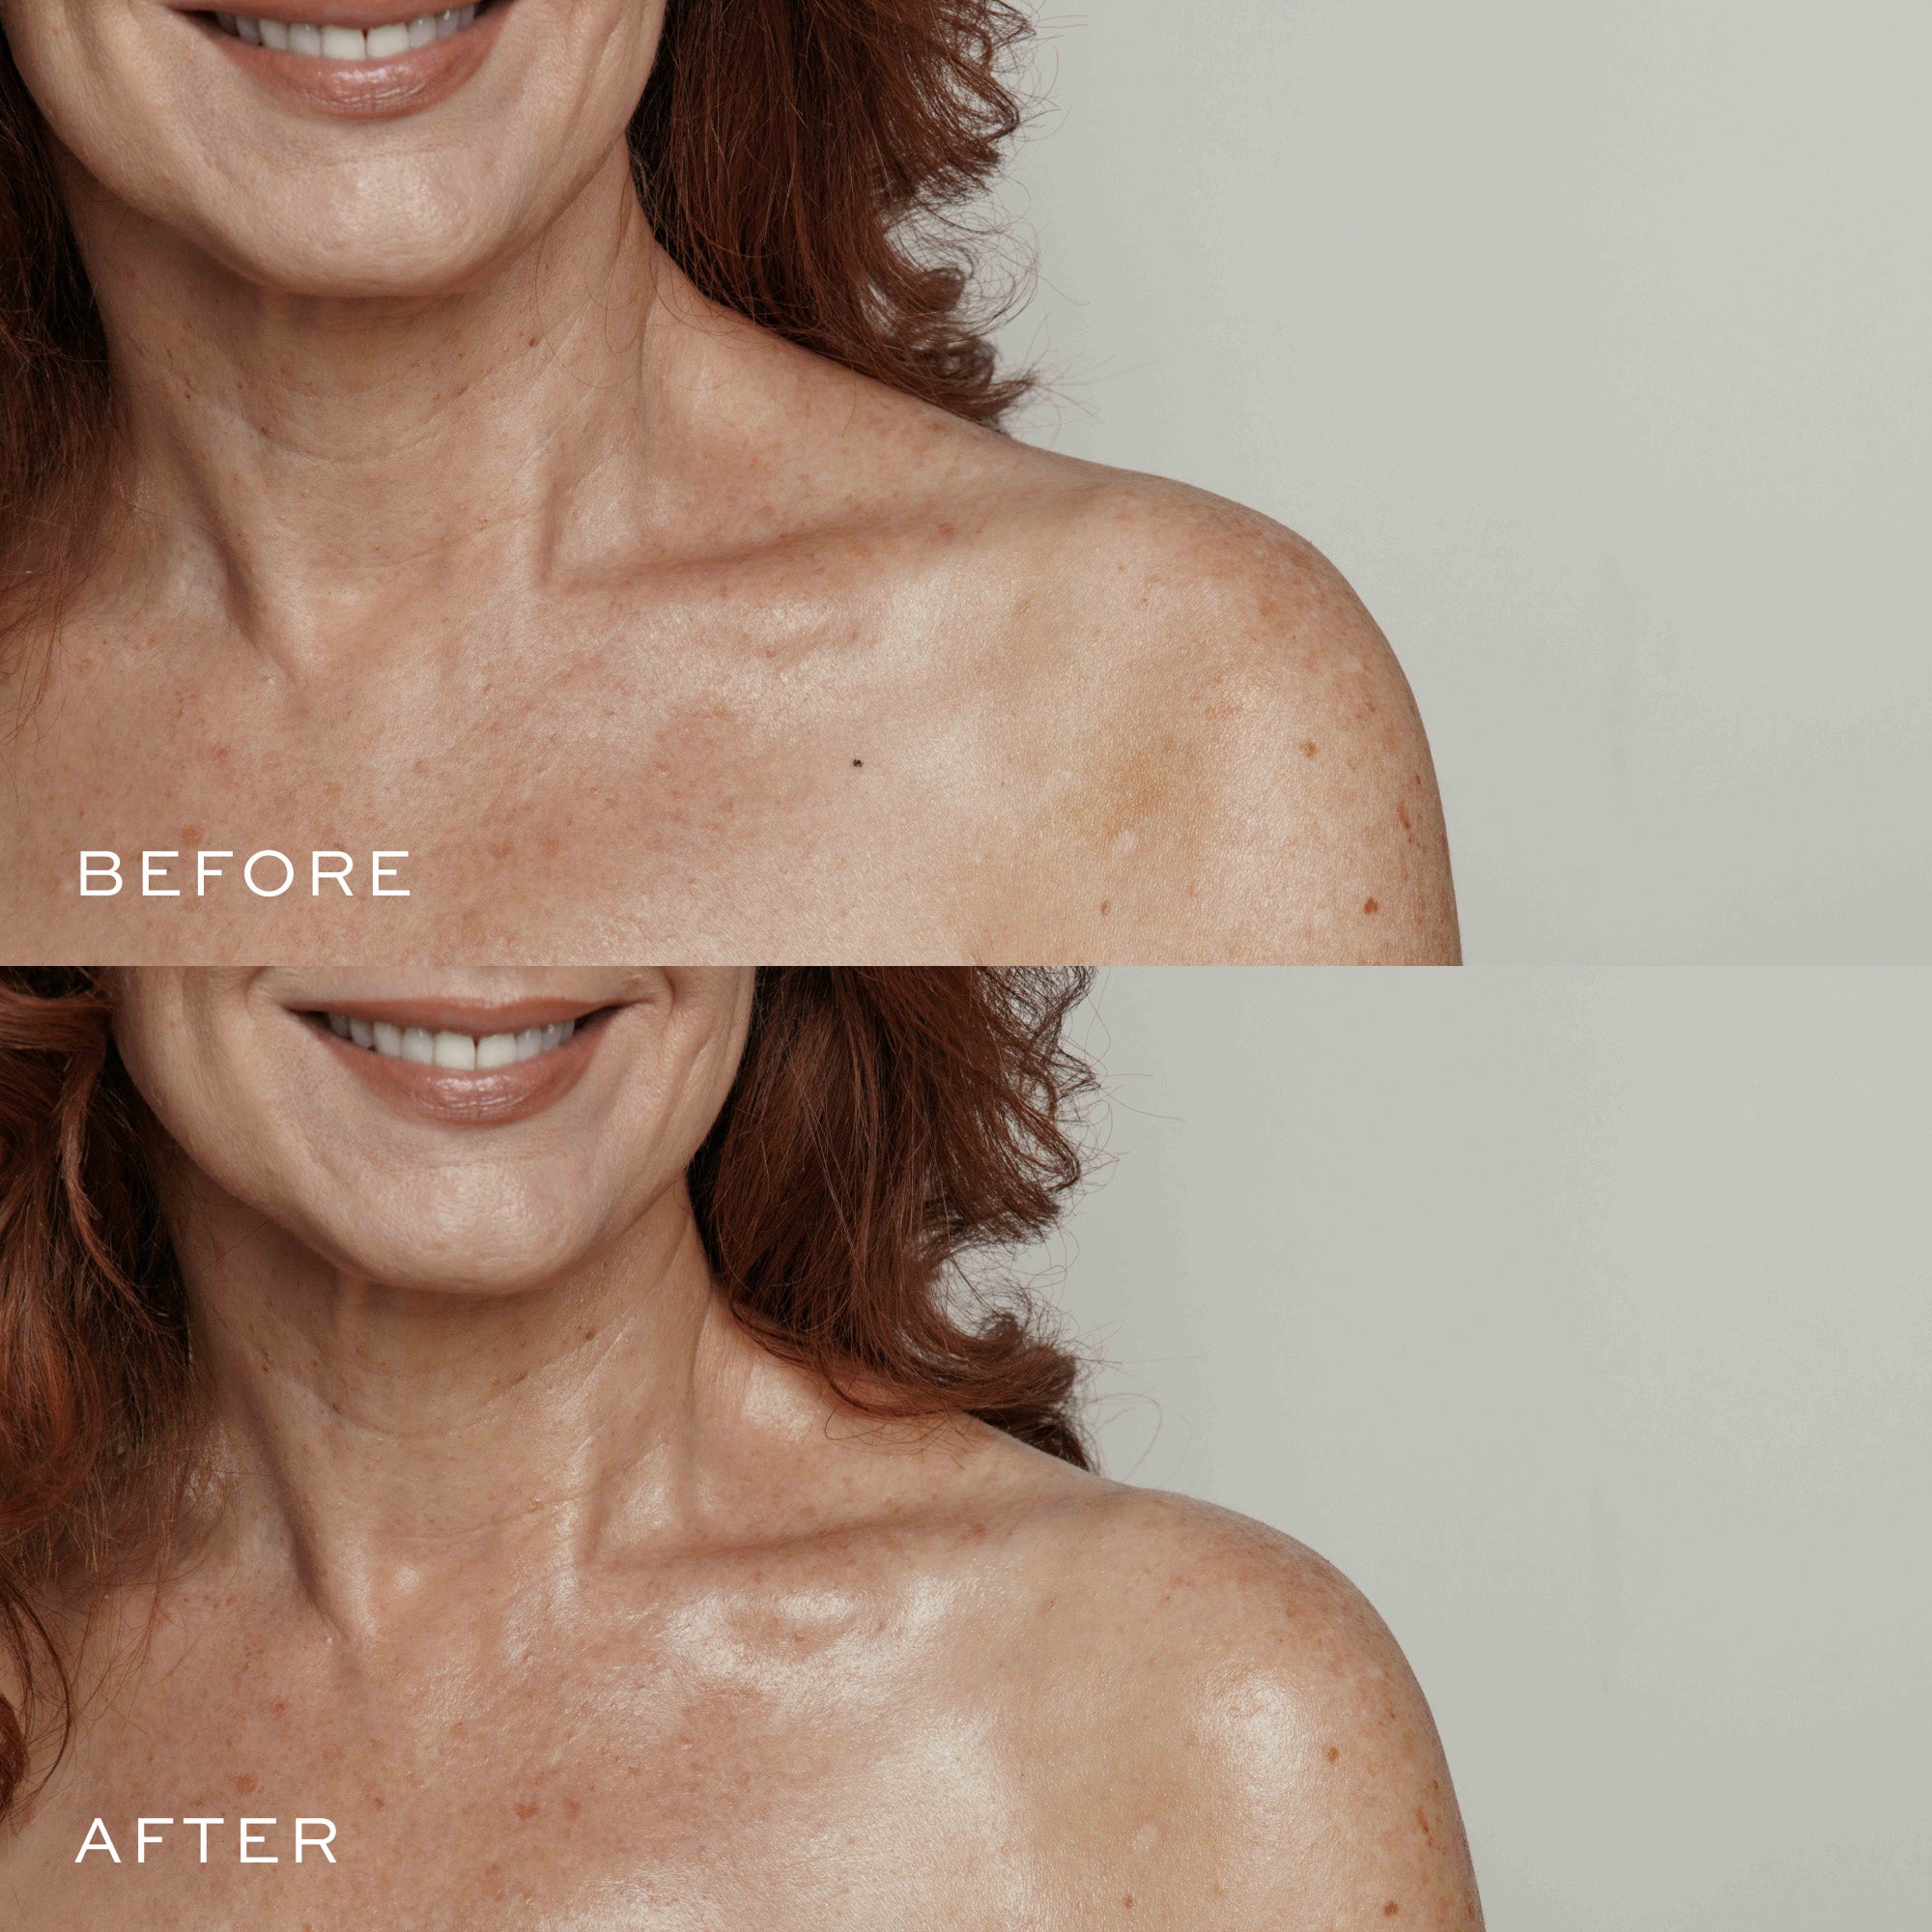 a woman before and after a skincare procedure